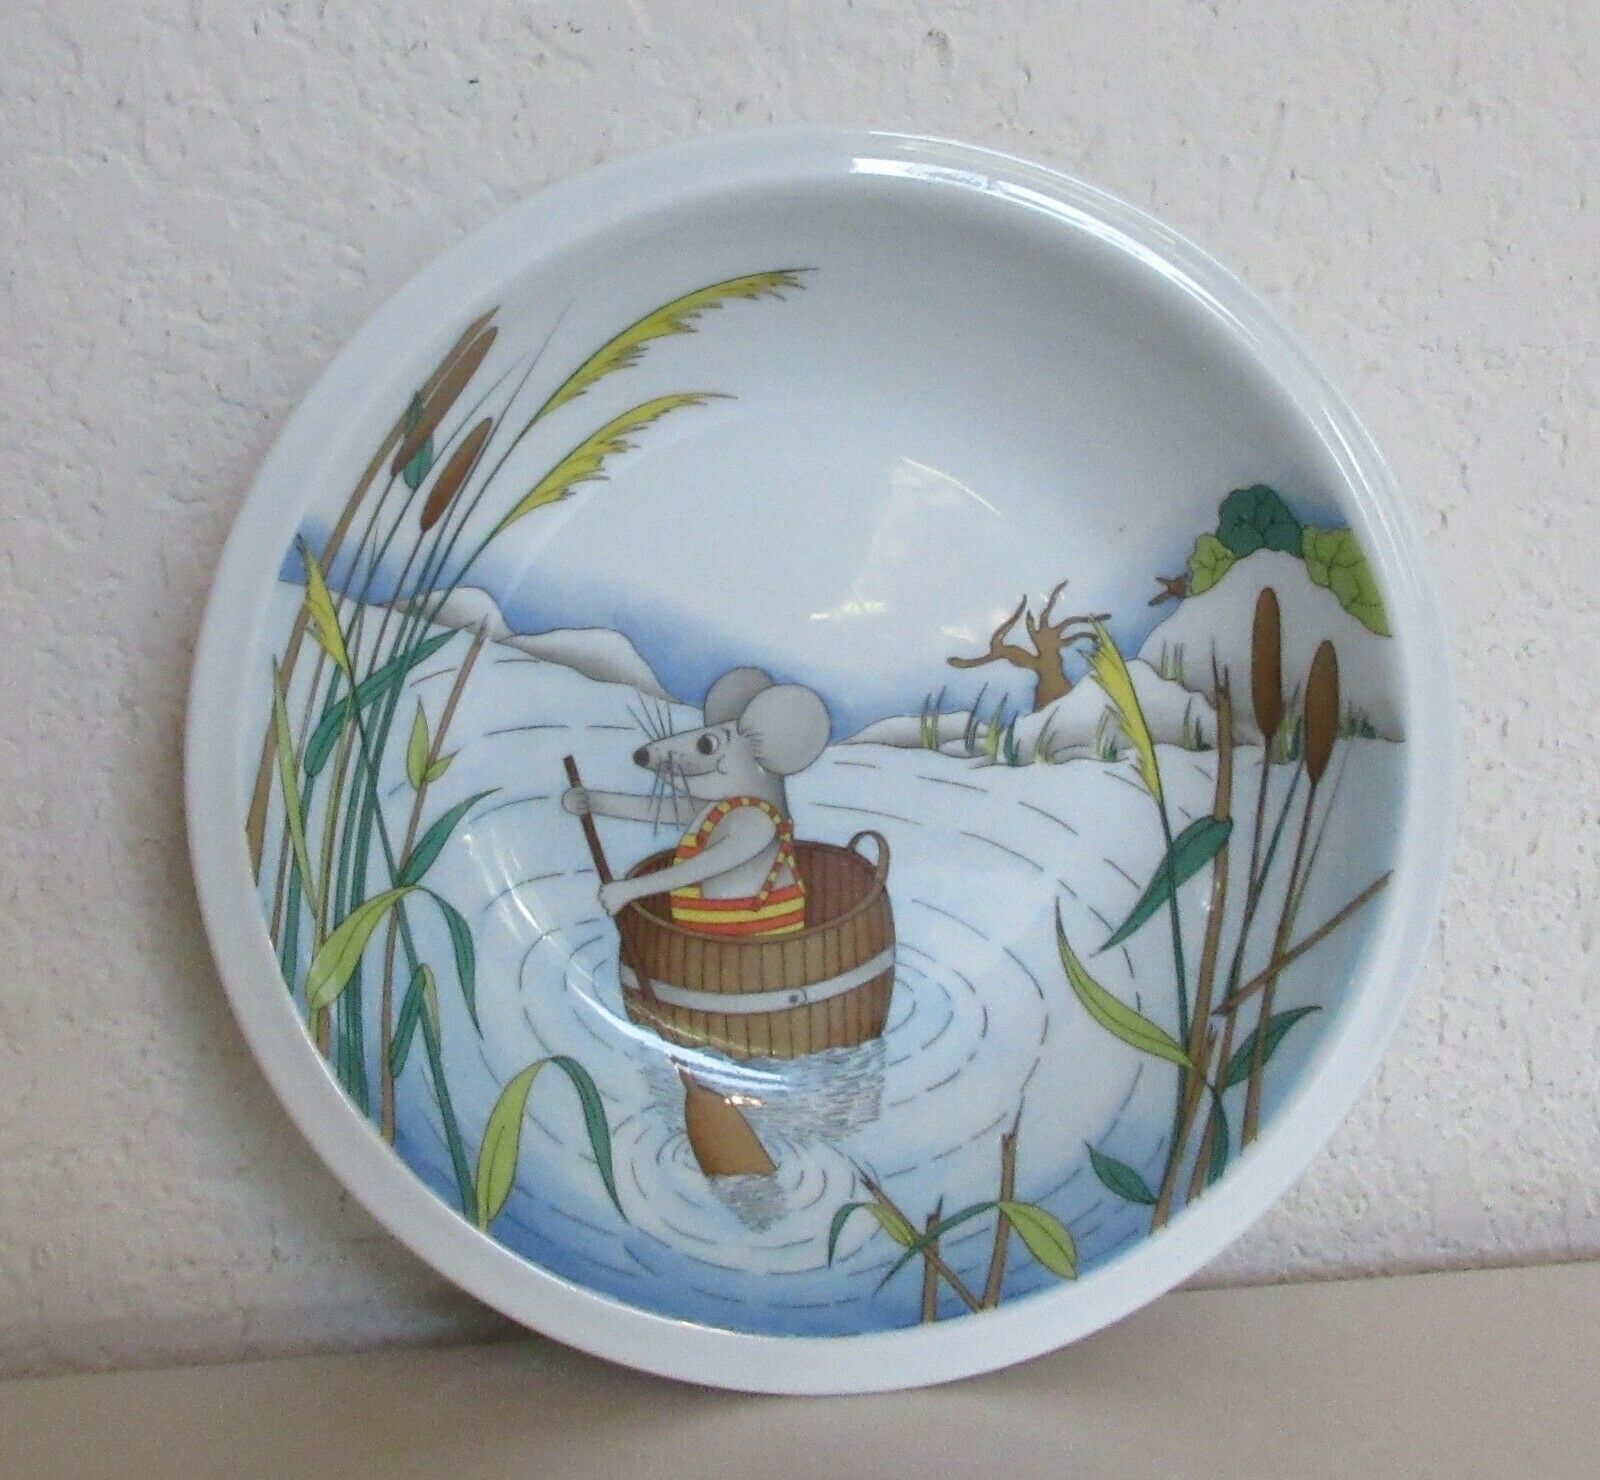 Winterling Porzellan Germany Child's Bowl Mouse Going Down River in Barrel